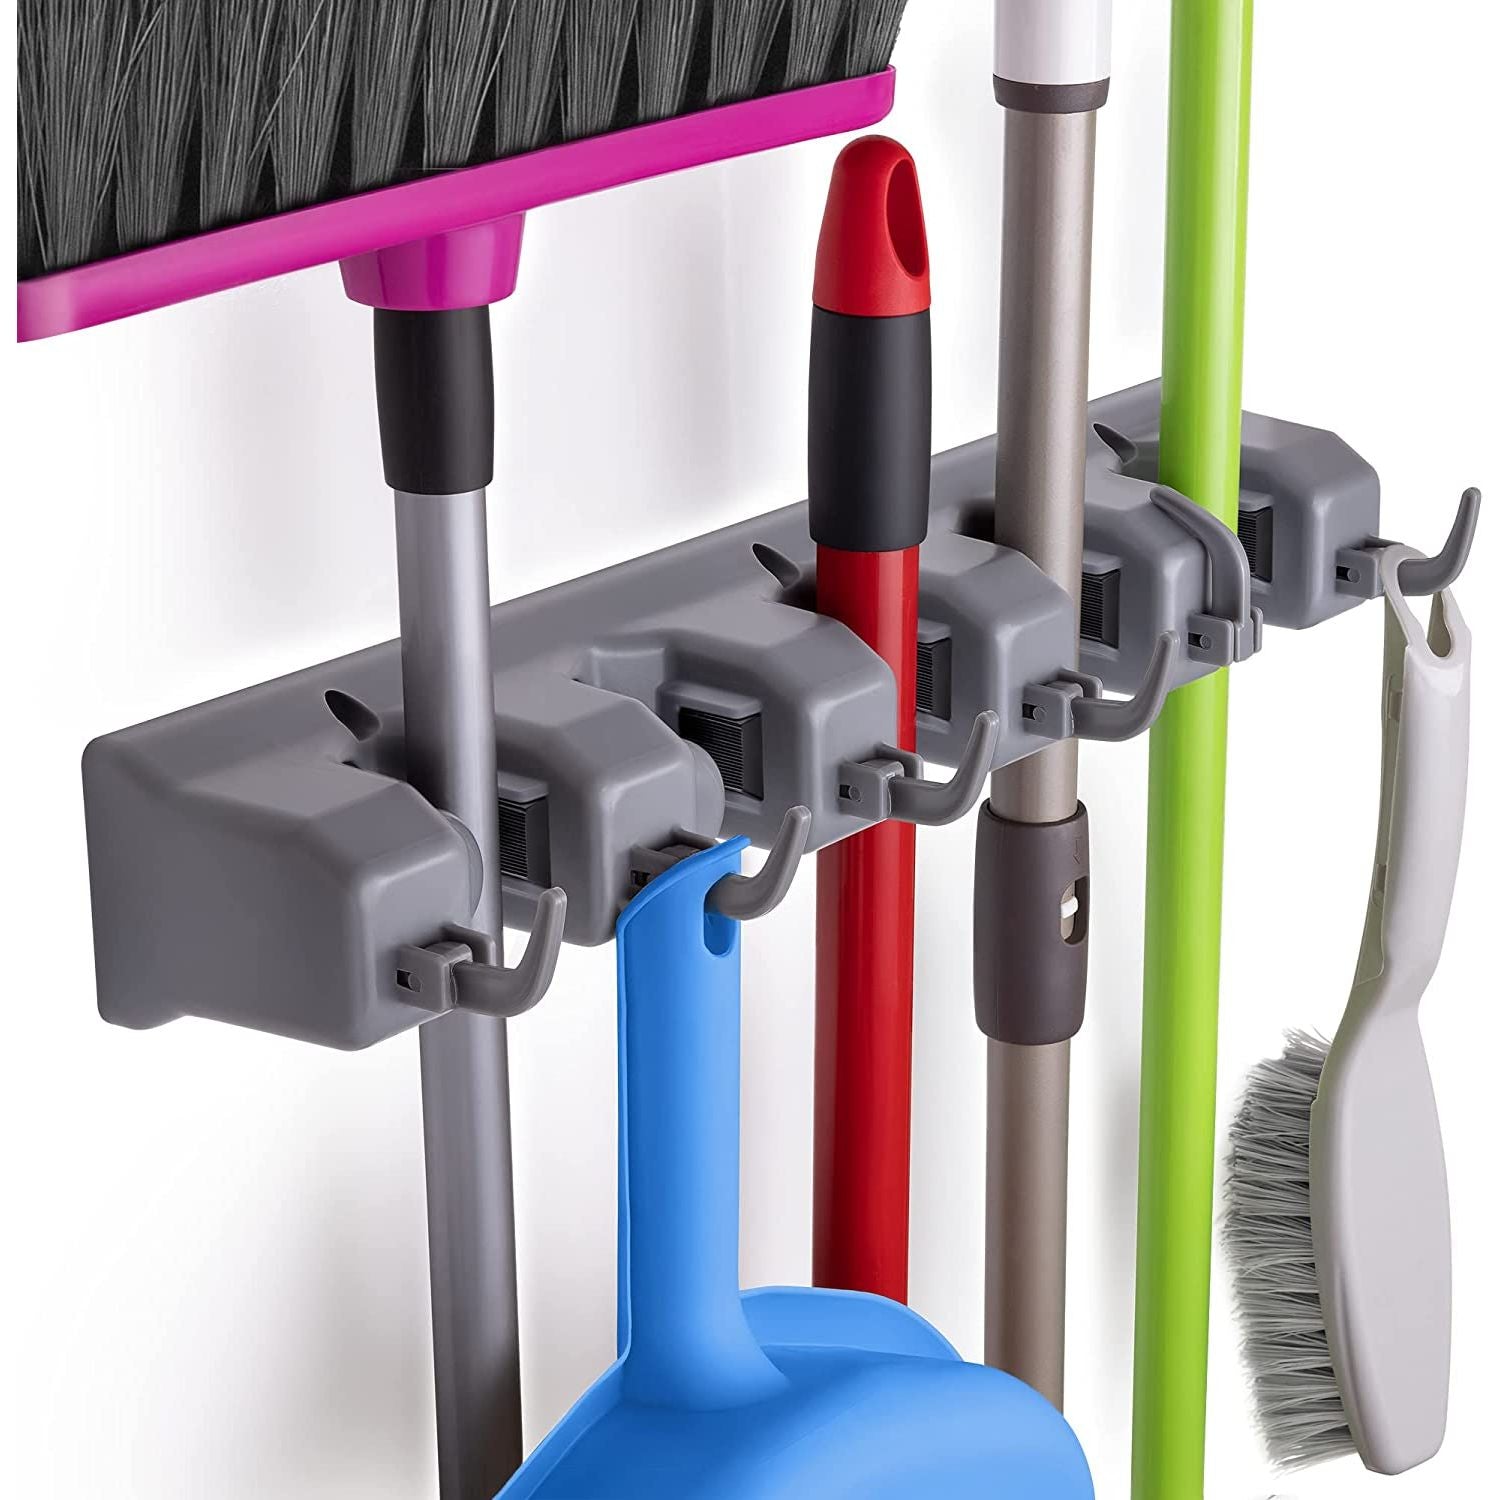 Zulay Home Mop and Broom Organizer Wall Mount